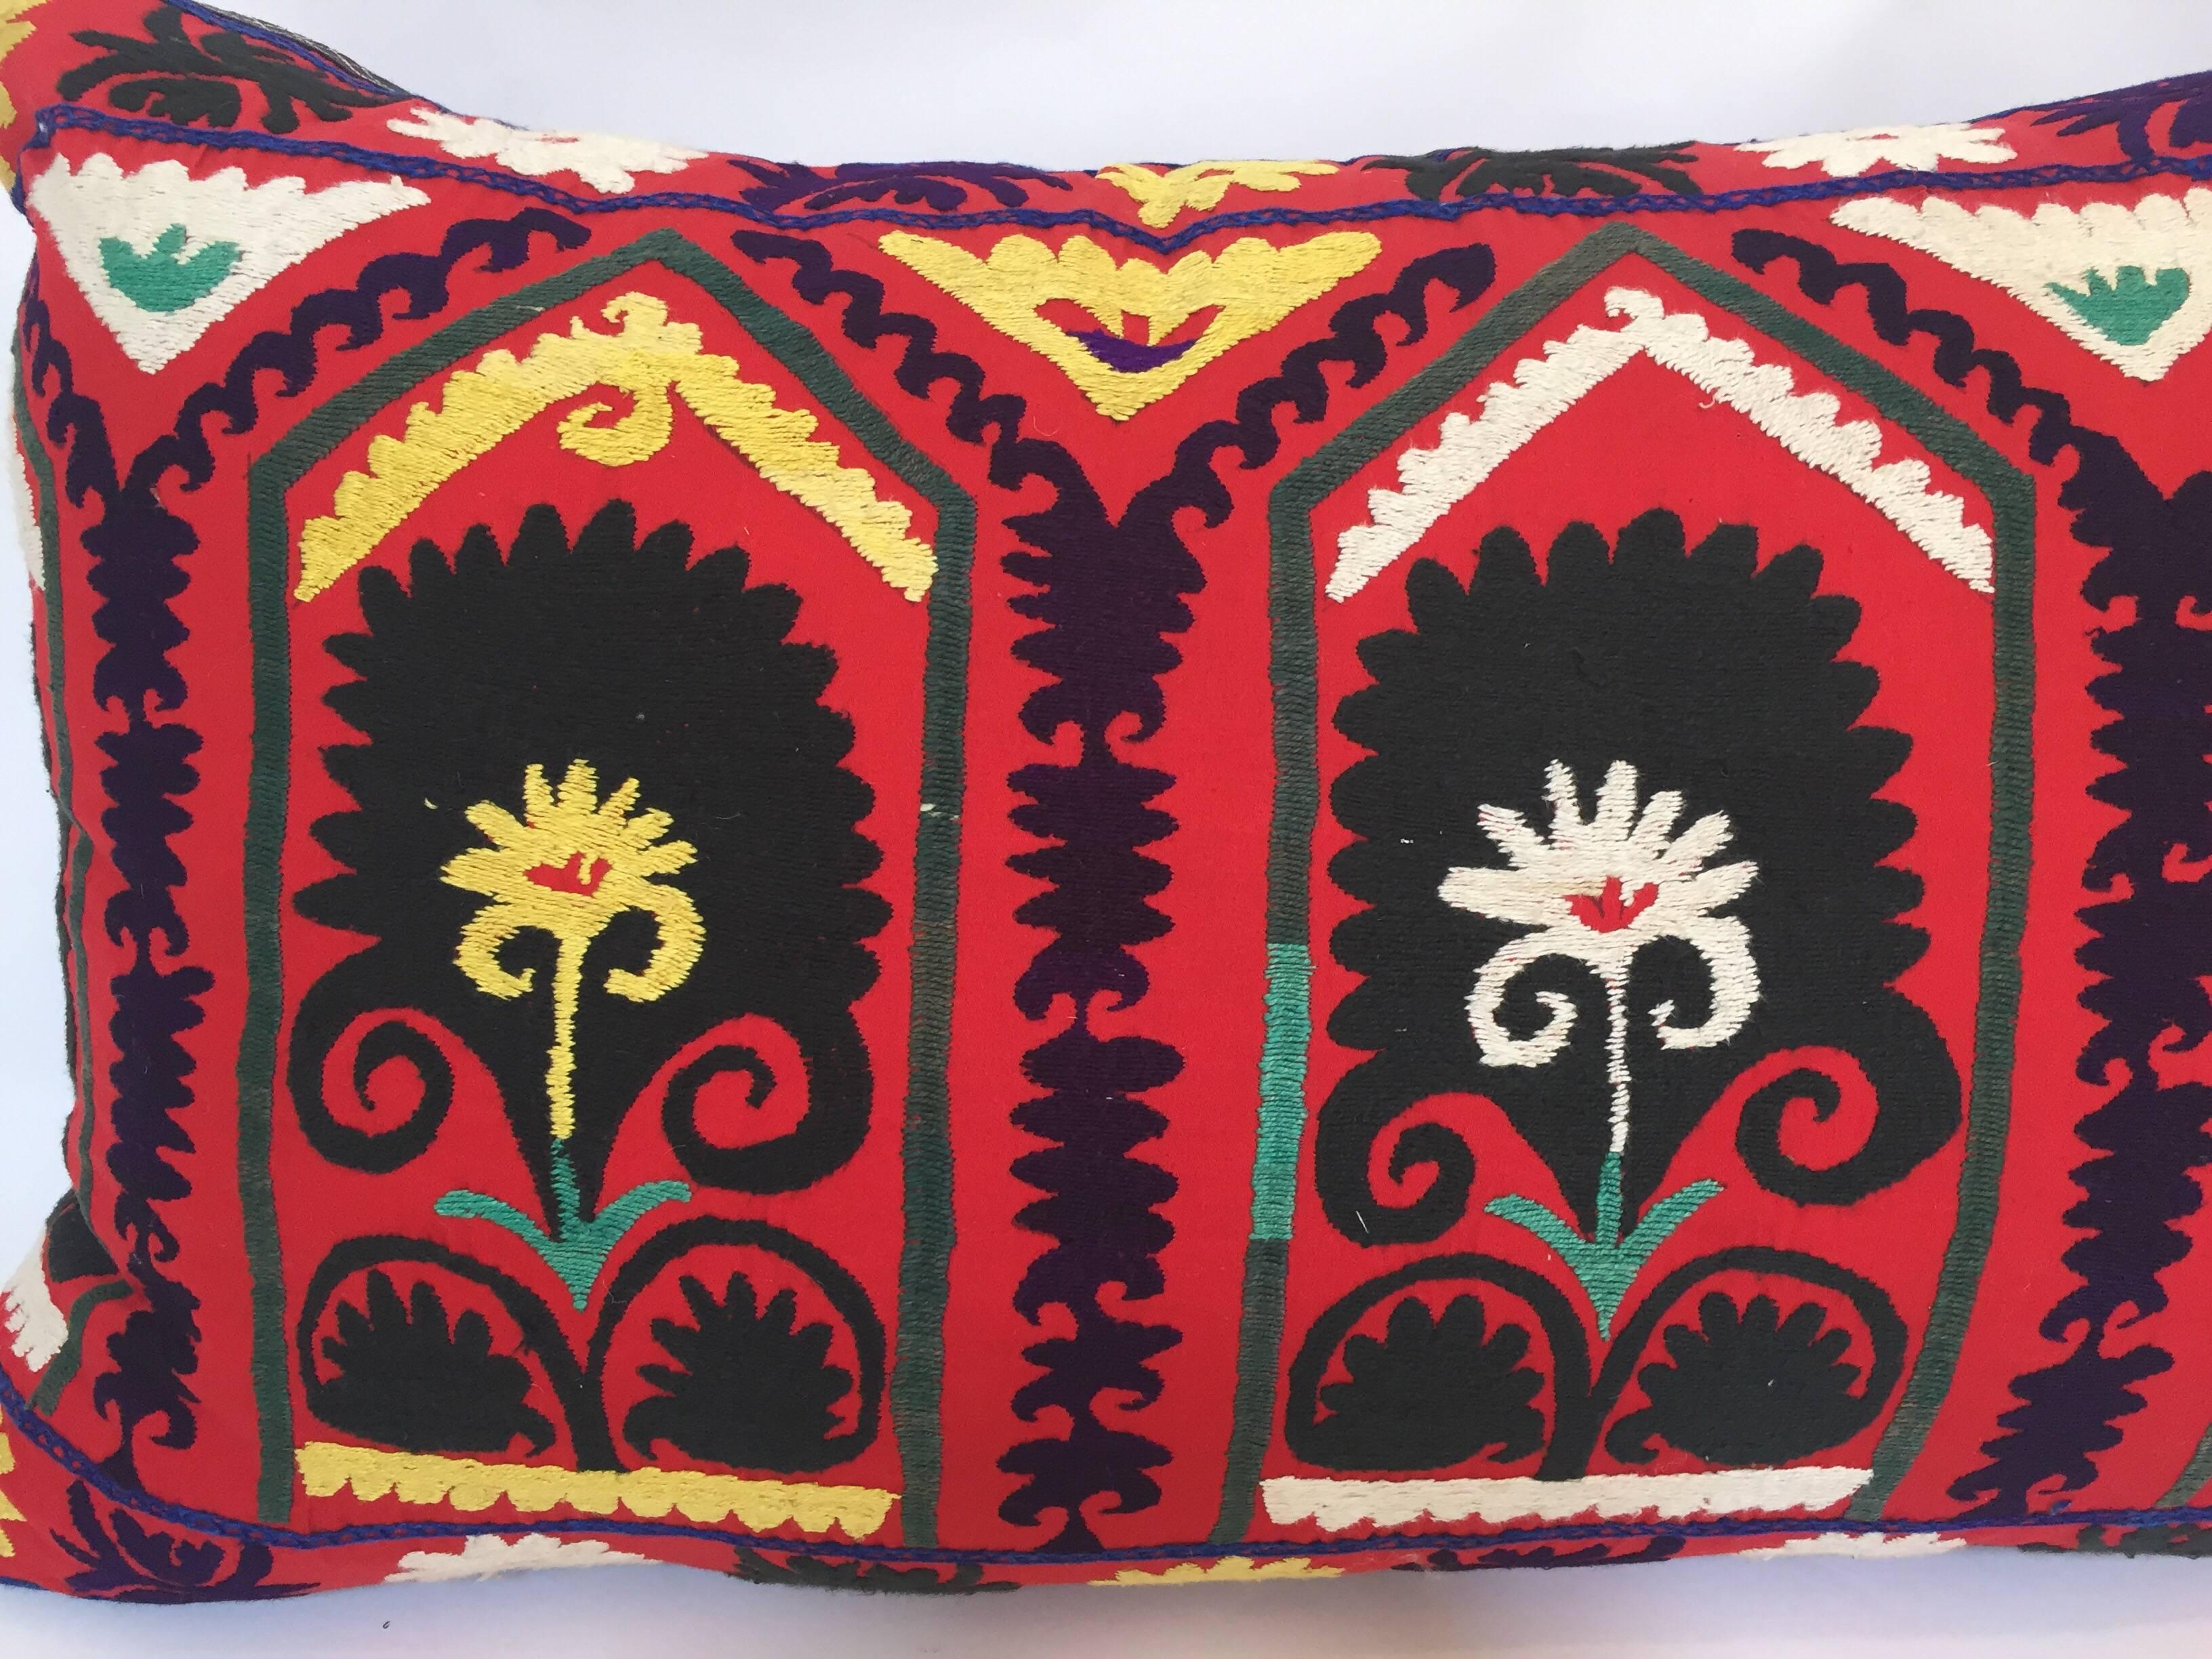 Hand-Crafted Vintage Colorful Suzani Embroidery Decorative Lumbar Pillow from Uzbekistan